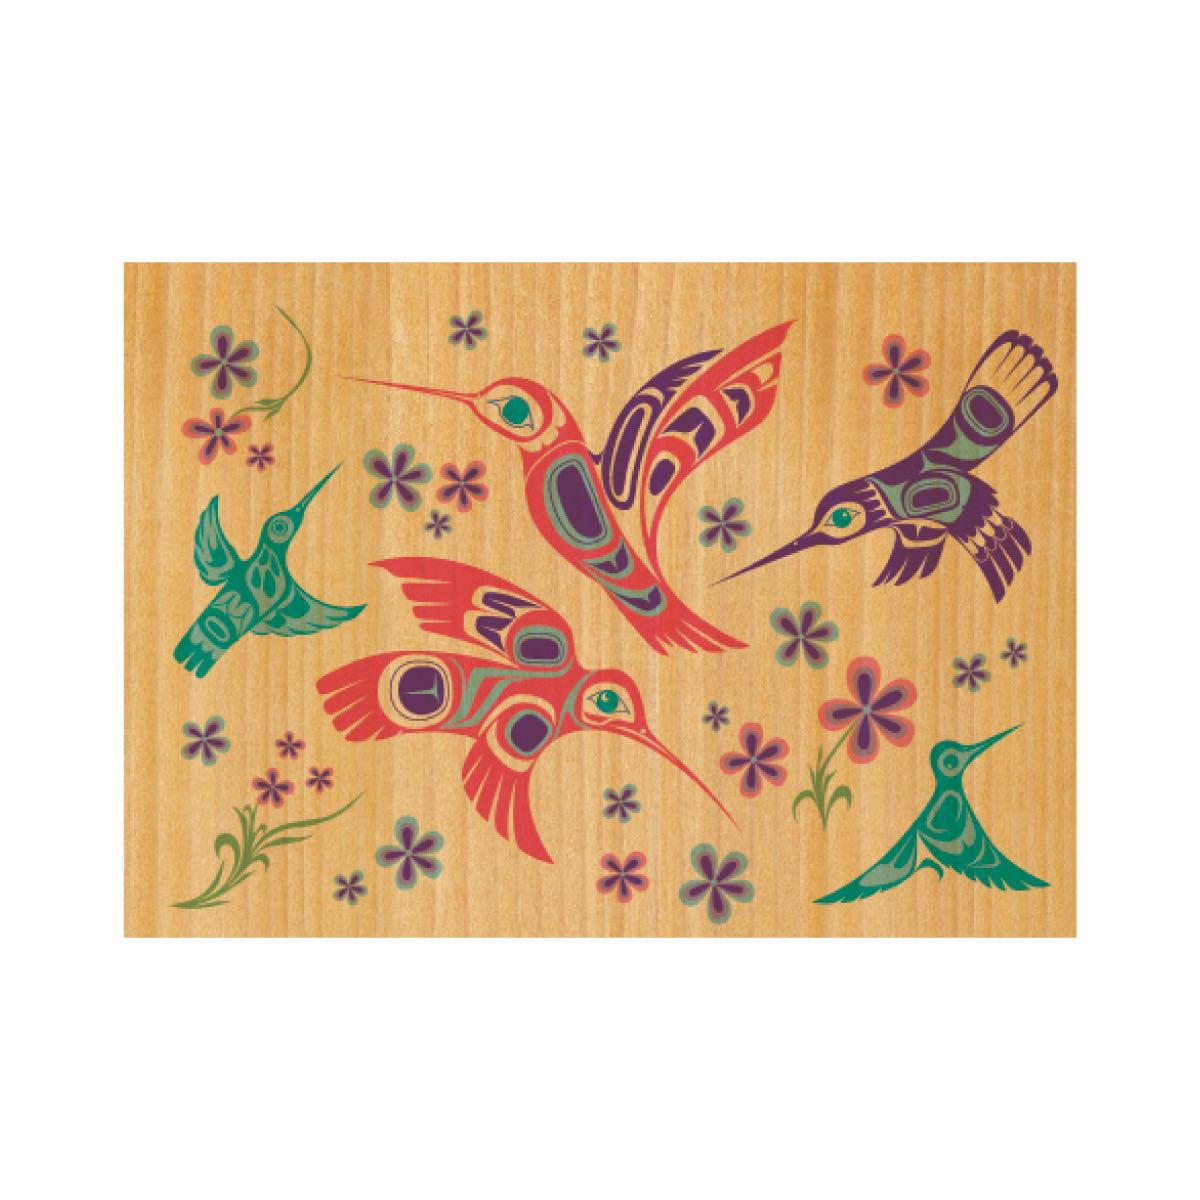 Postcard PW Infinite Joy - Postcard PW Infinite Joy -  - House of Himwitsa Native Art Gallery and Gifts